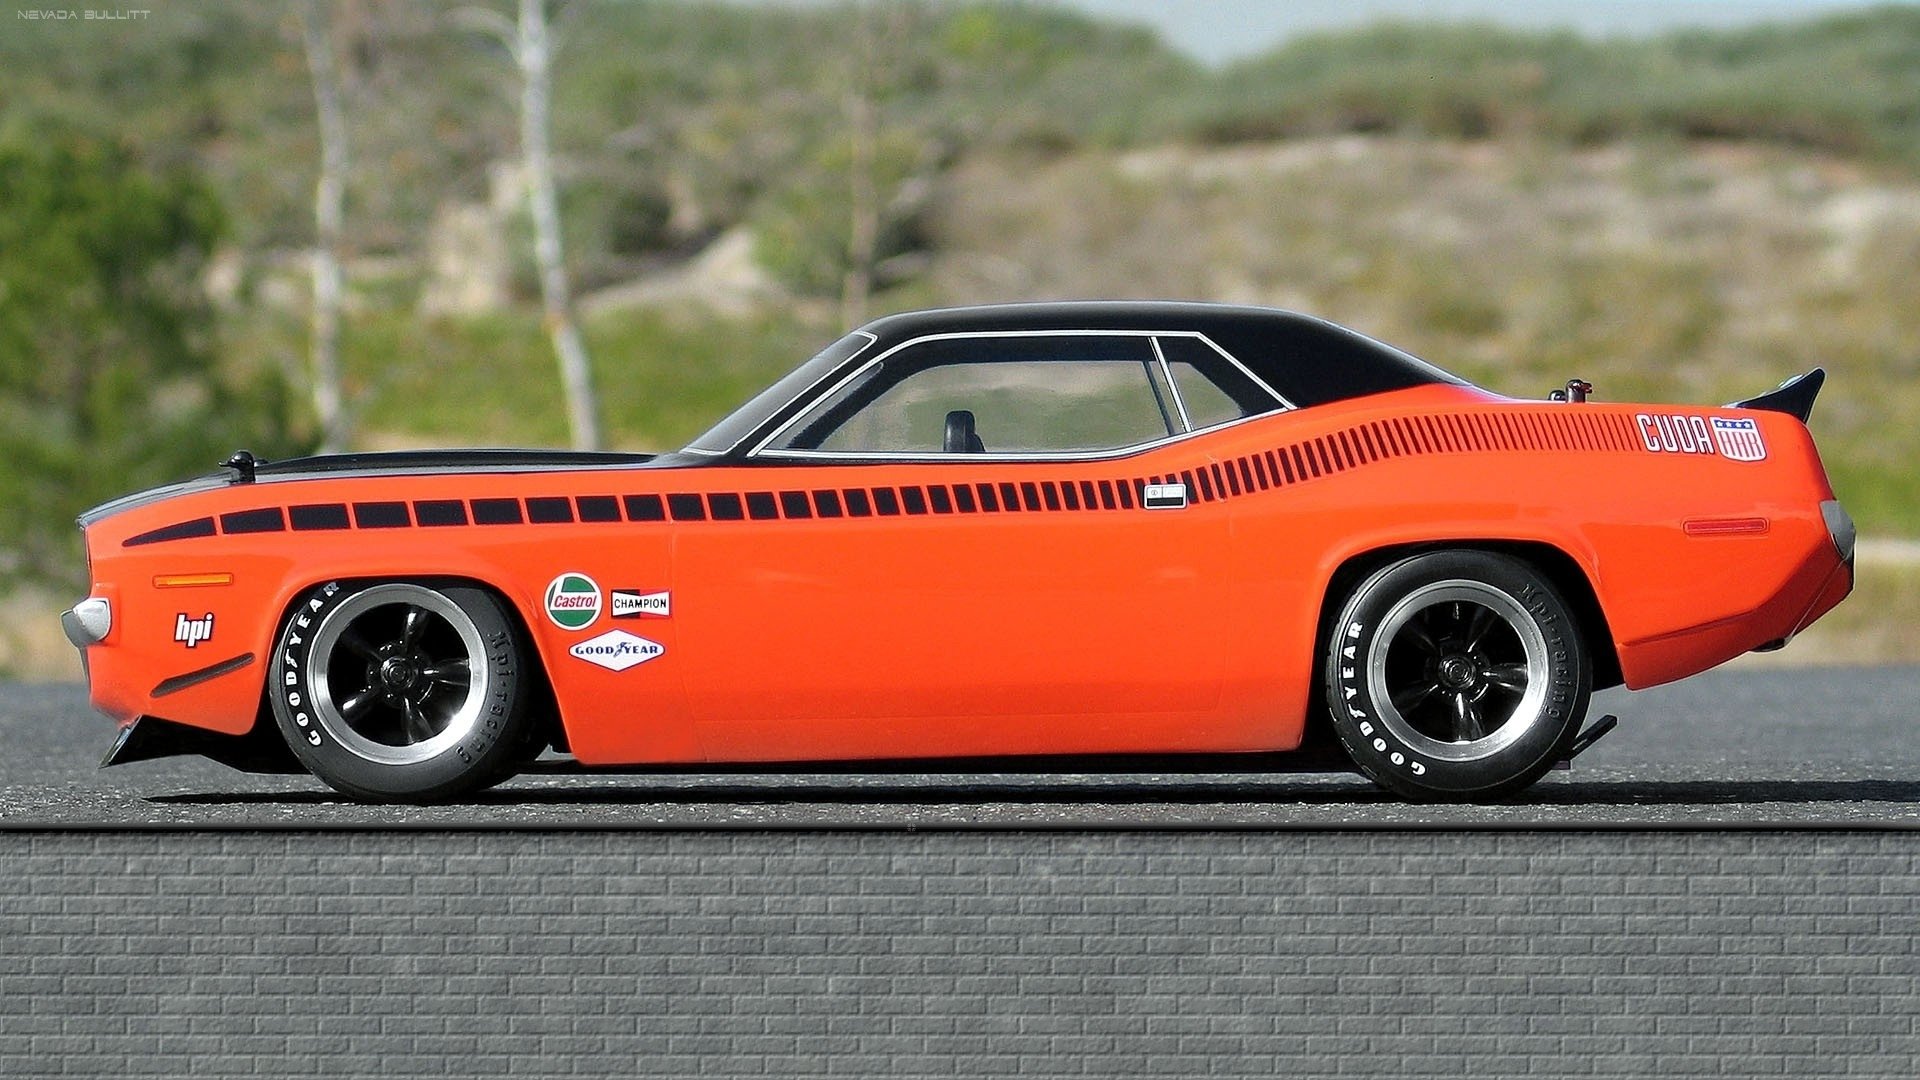 Awesome Plymouth Barracuda free wallpaper ID:110326 for hd 1920x1080 computer